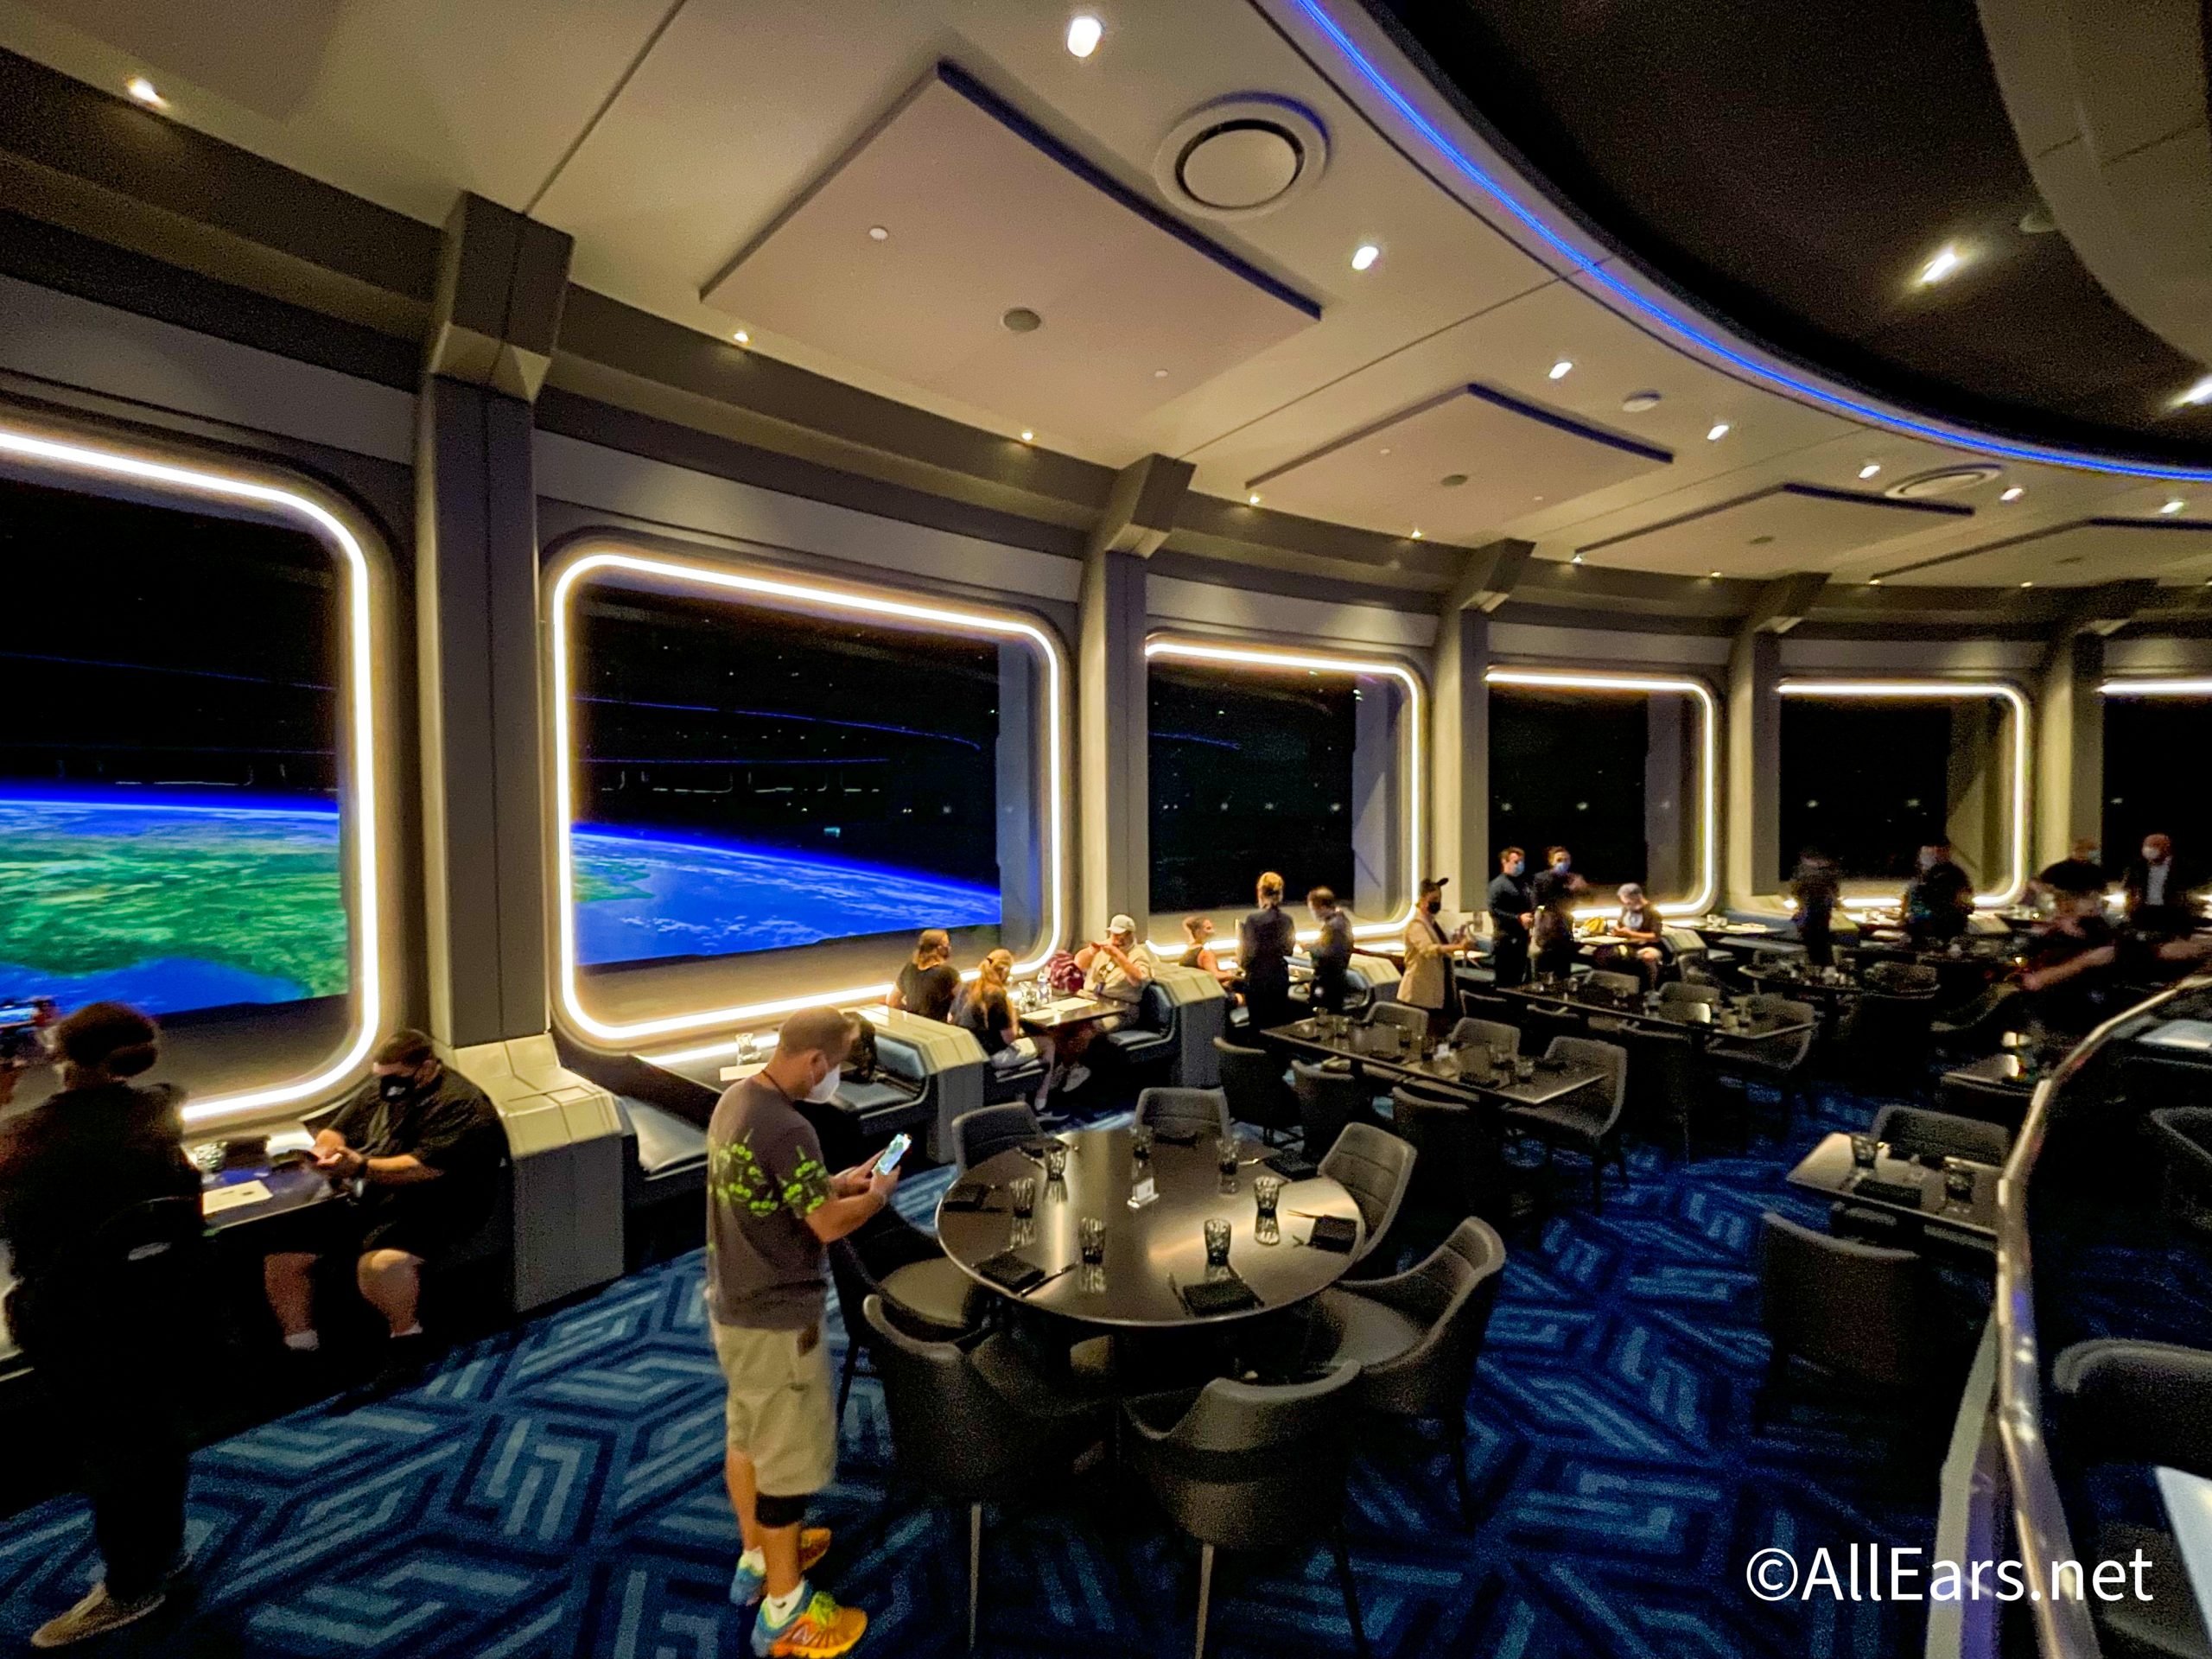 Is EPCOT's Space 220 Worth the Price Tag? - AllEars.Net